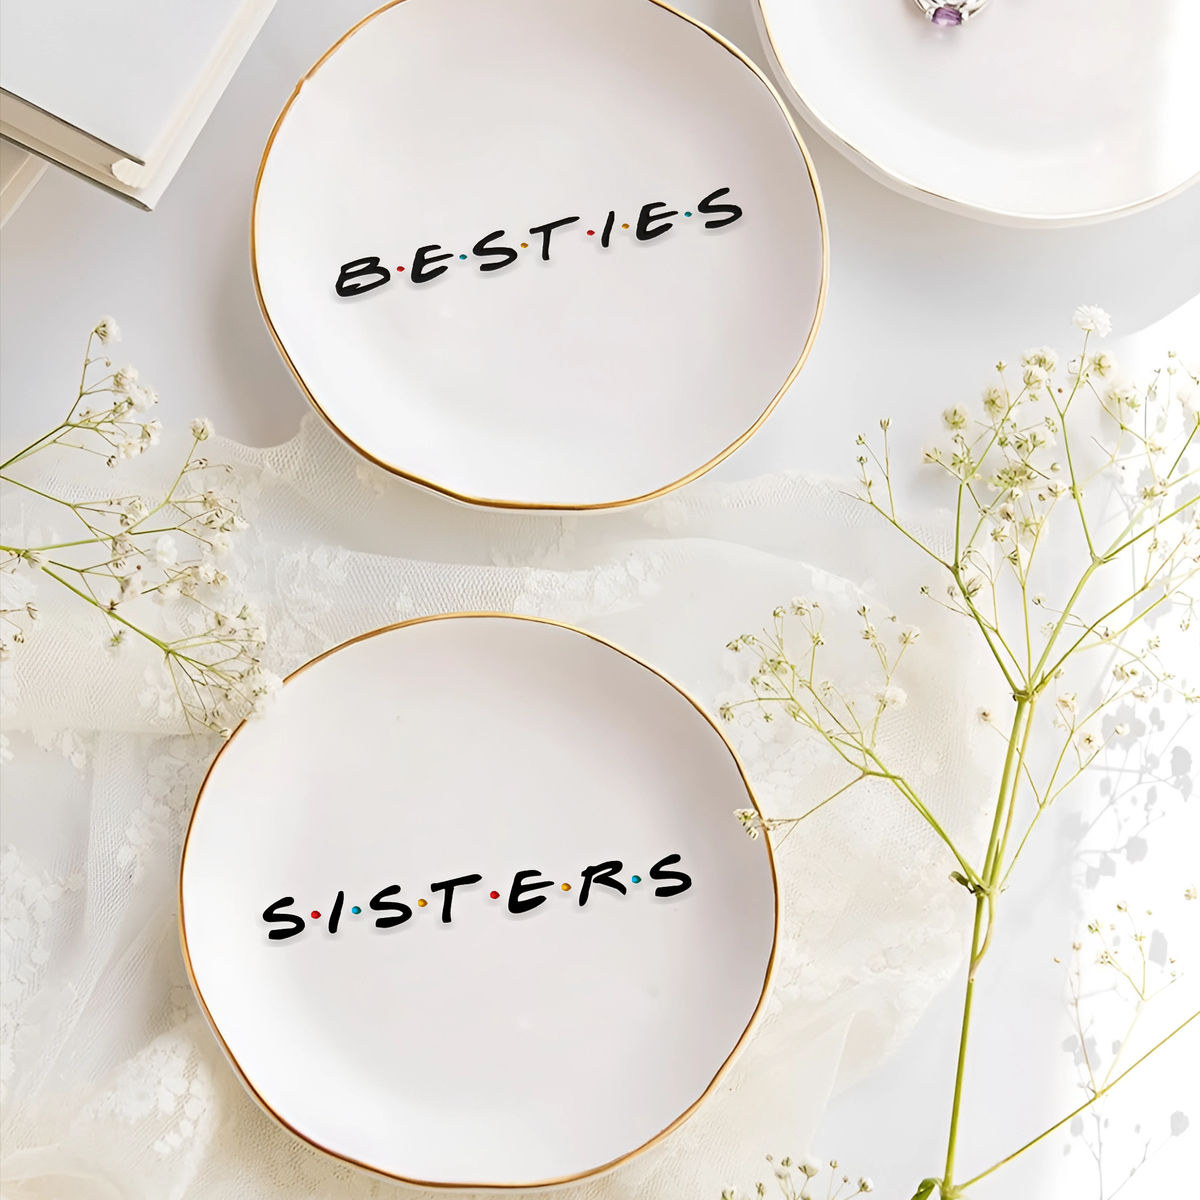 Personalized Jewelry Dish - Jewelry Tray - Jewelry Dish - Sister Friend Bestie - Friends, Sister Gifts, Birthday Gifts For Sister, Friends